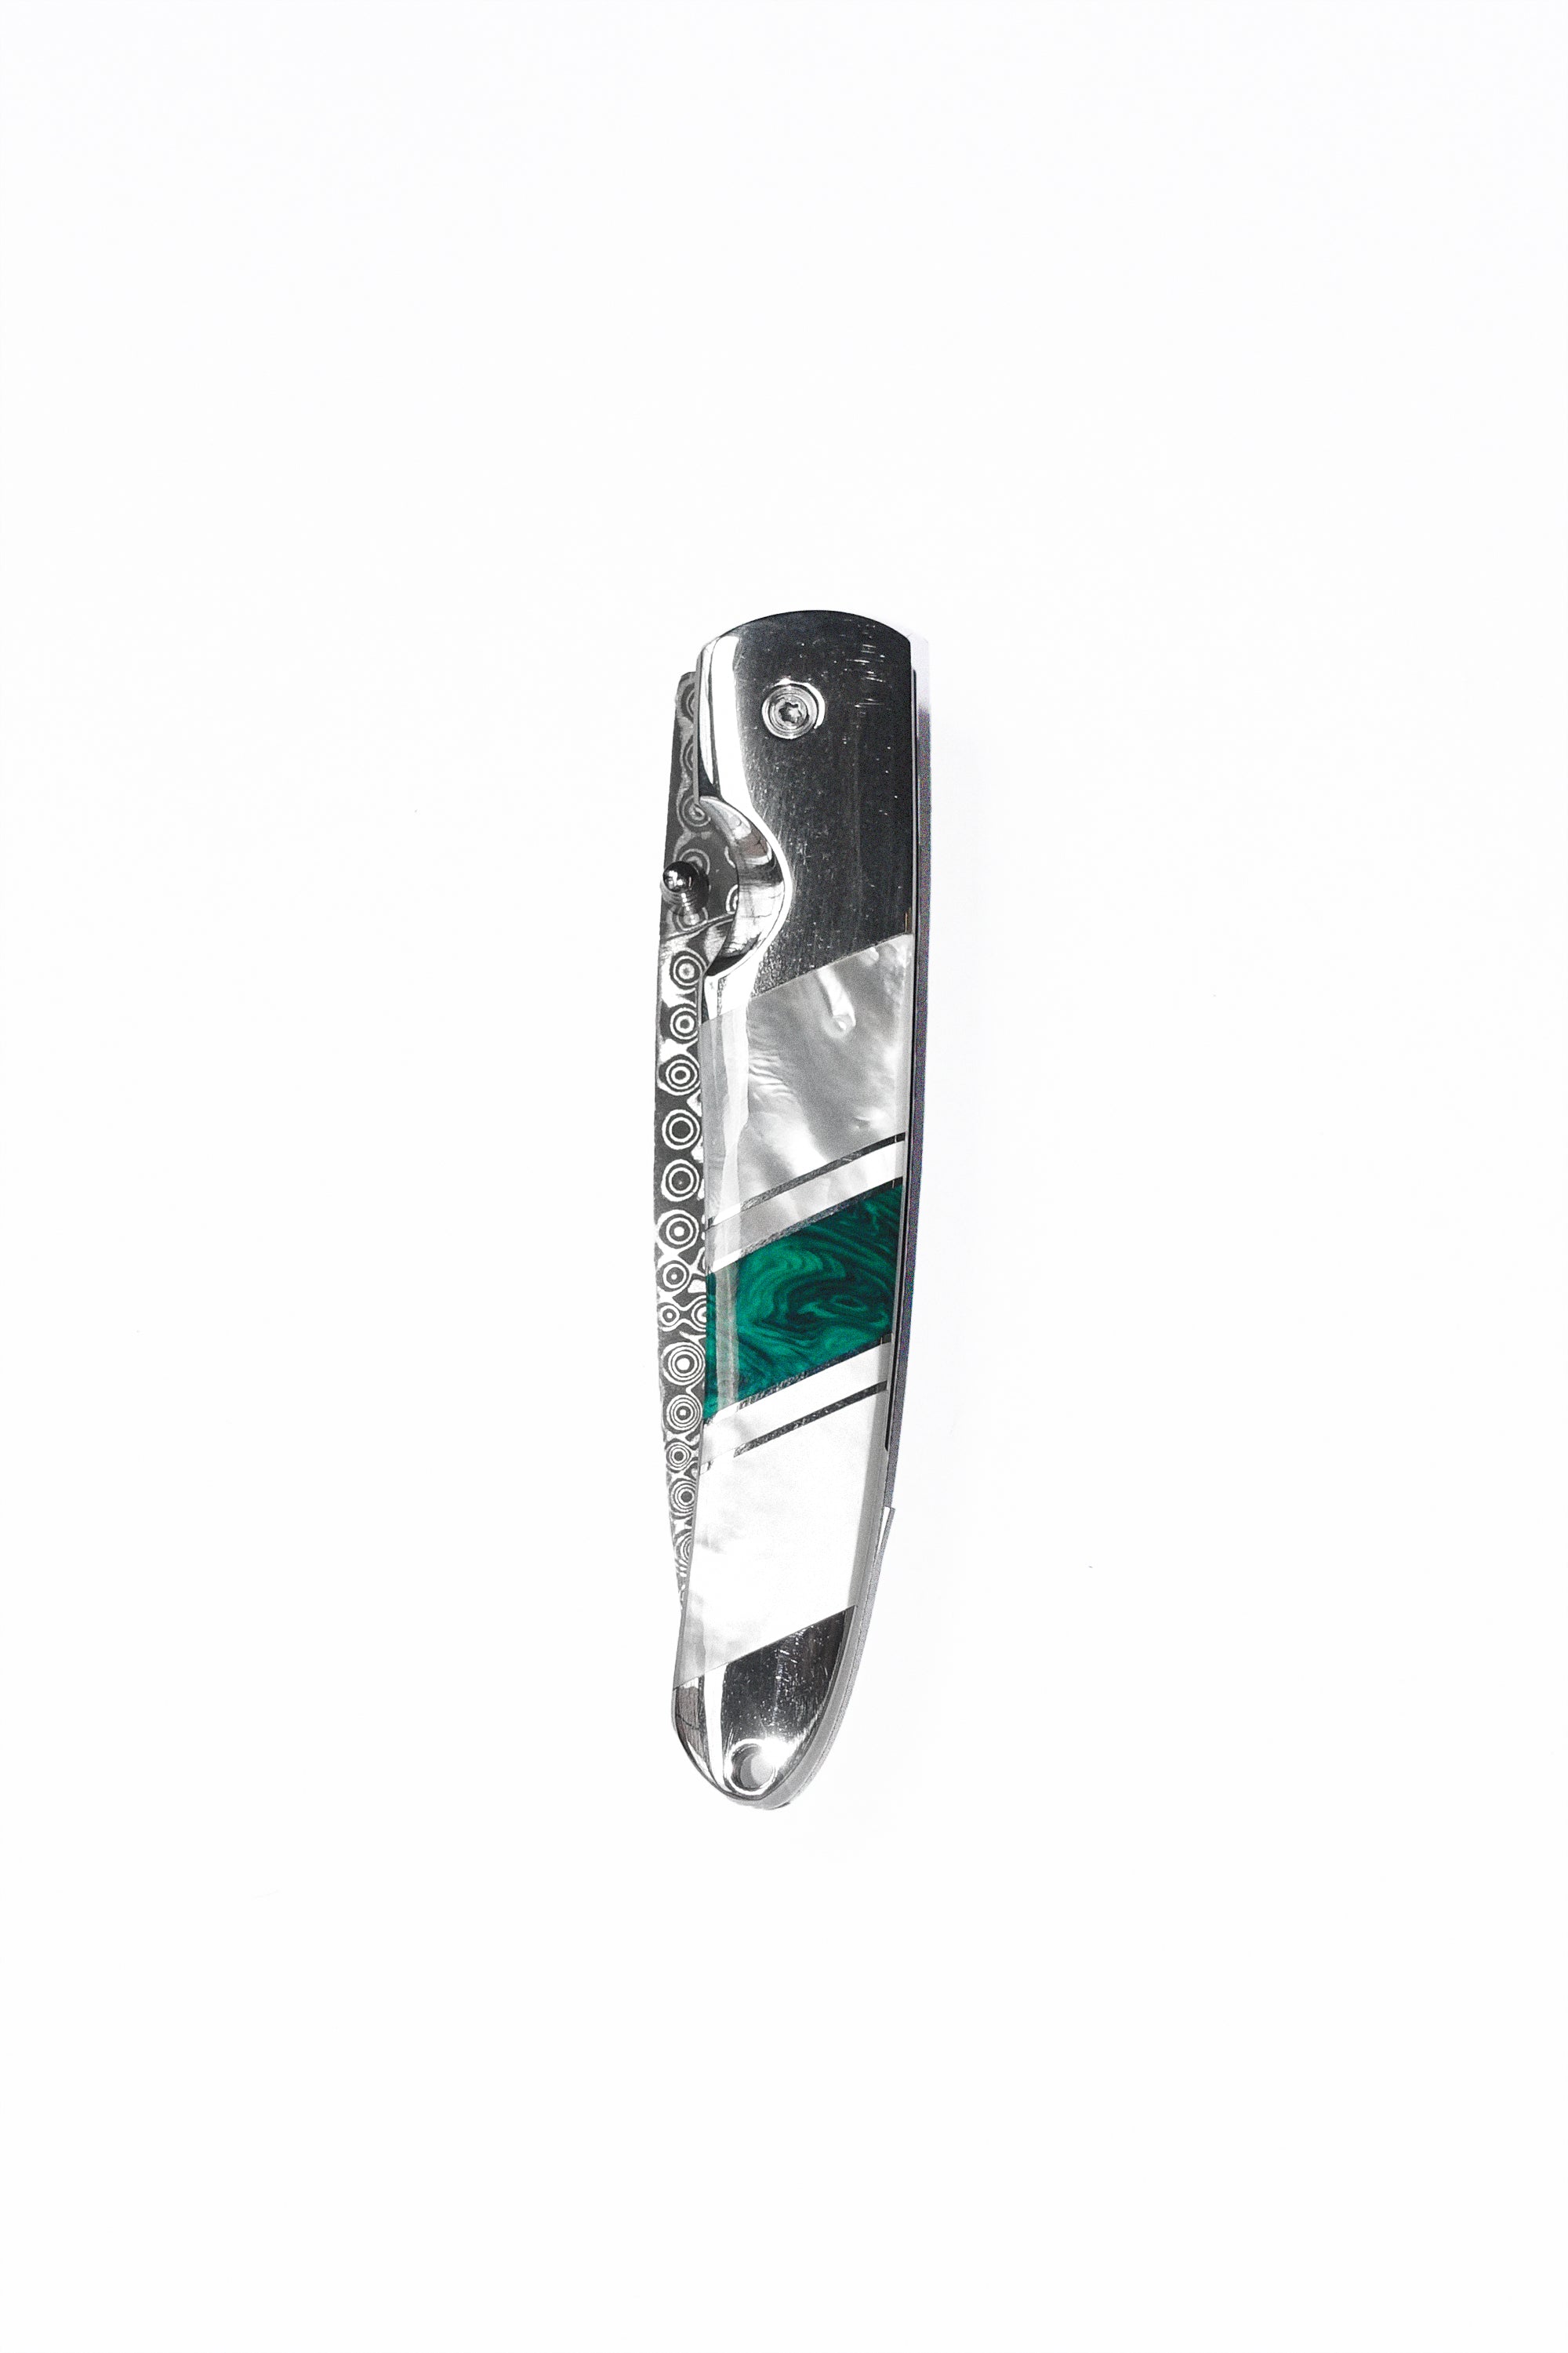 4" Pocket Knife in Malachite & Mother of Pearl